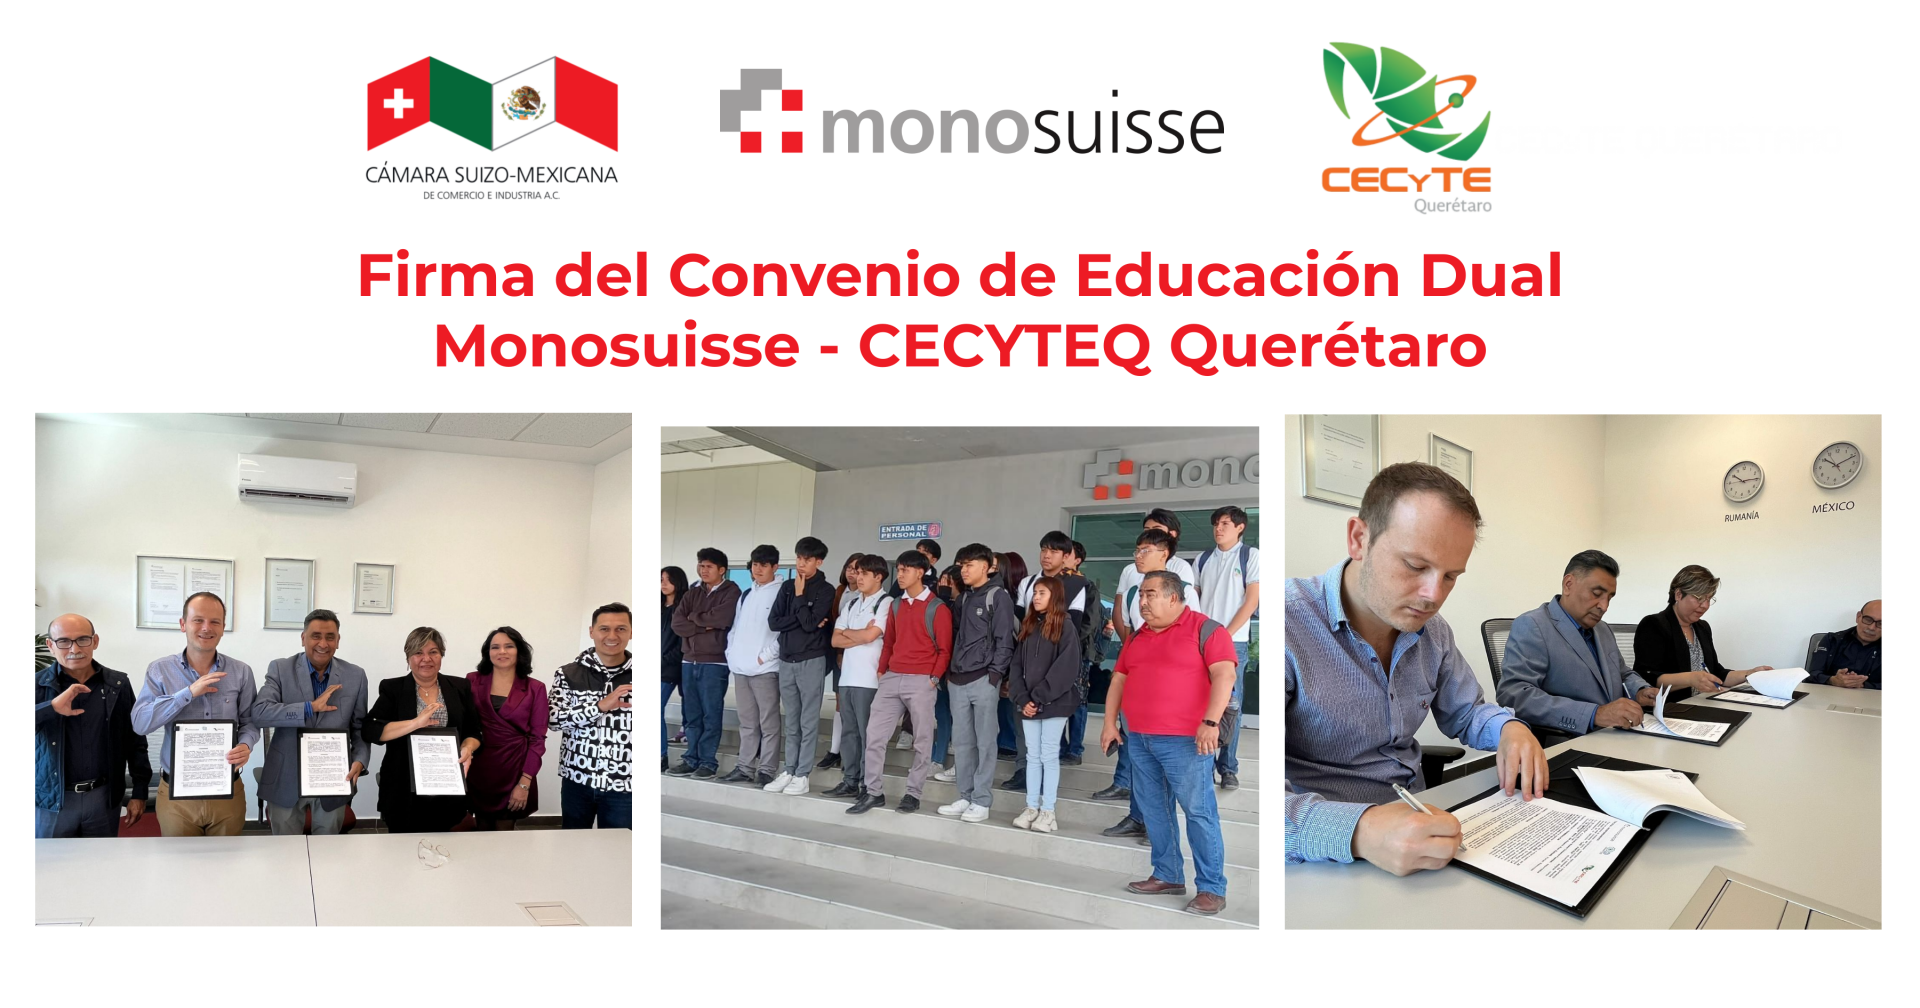 Signing of the Dual Education Agreement Monosuisse – CECYTEQ Querétaro